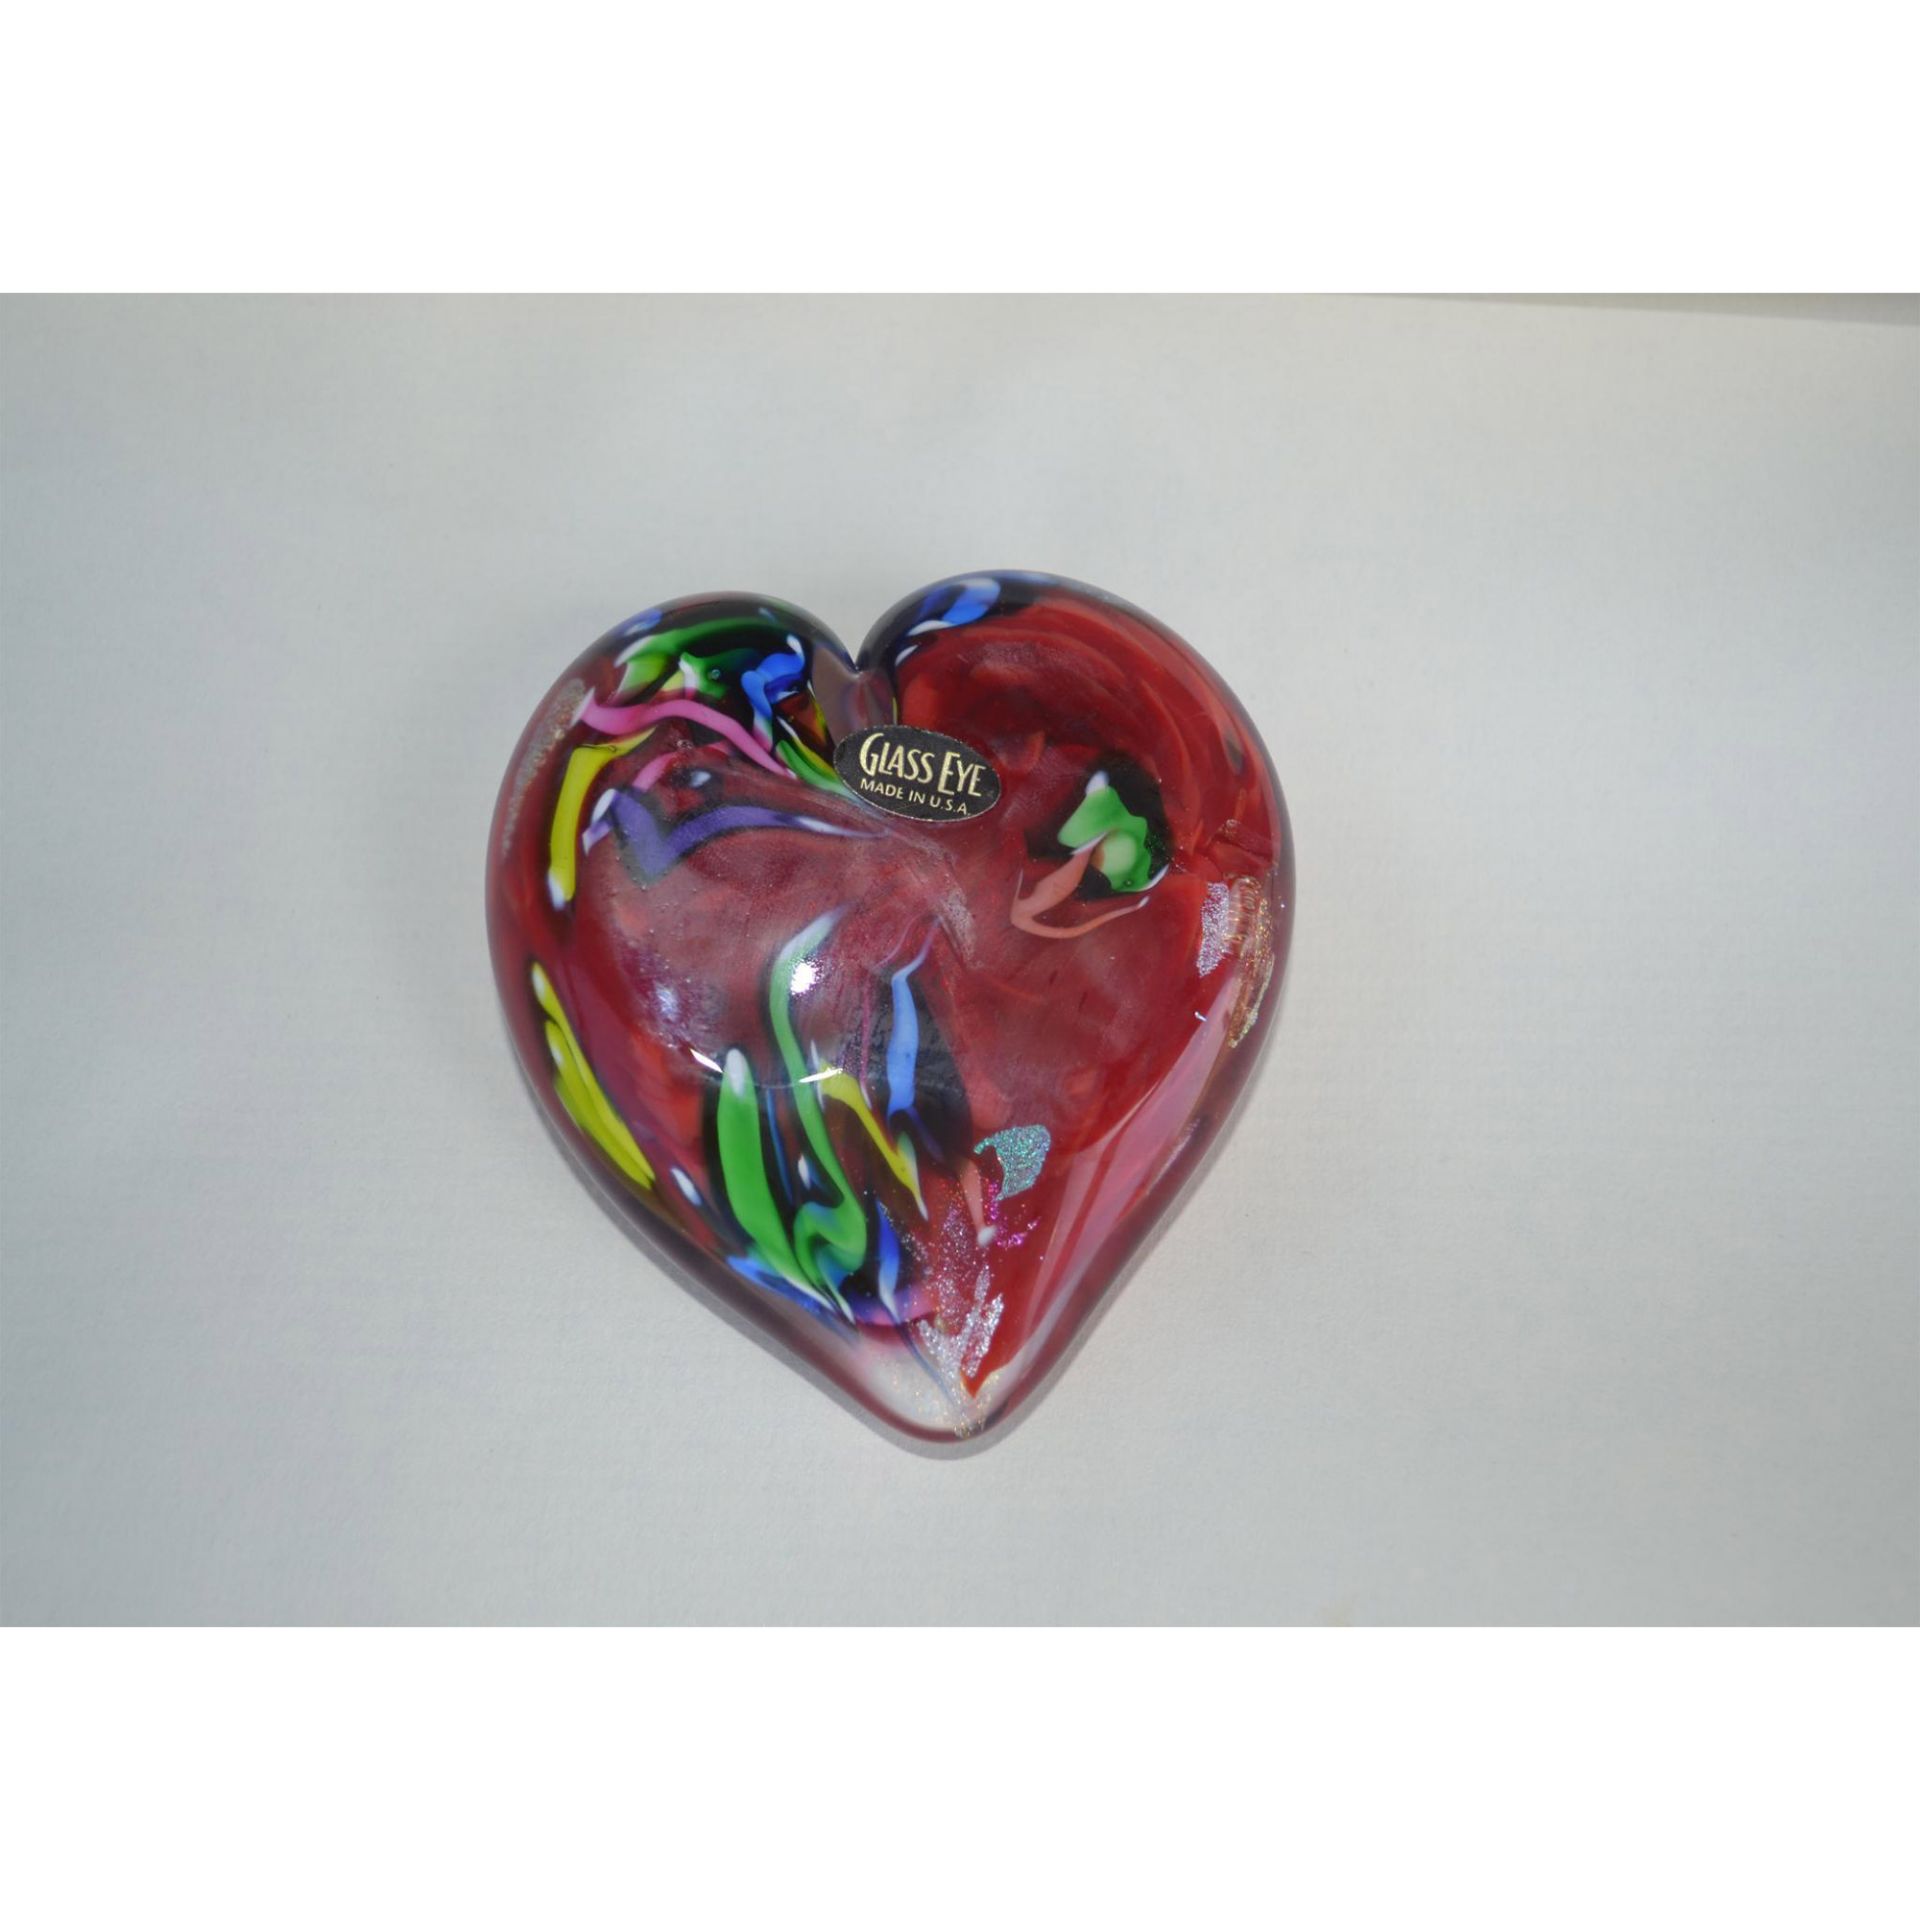 Glass Eye Studio Art Glass Red Hearts Of Fire Paperweight. - Image 2 of 2